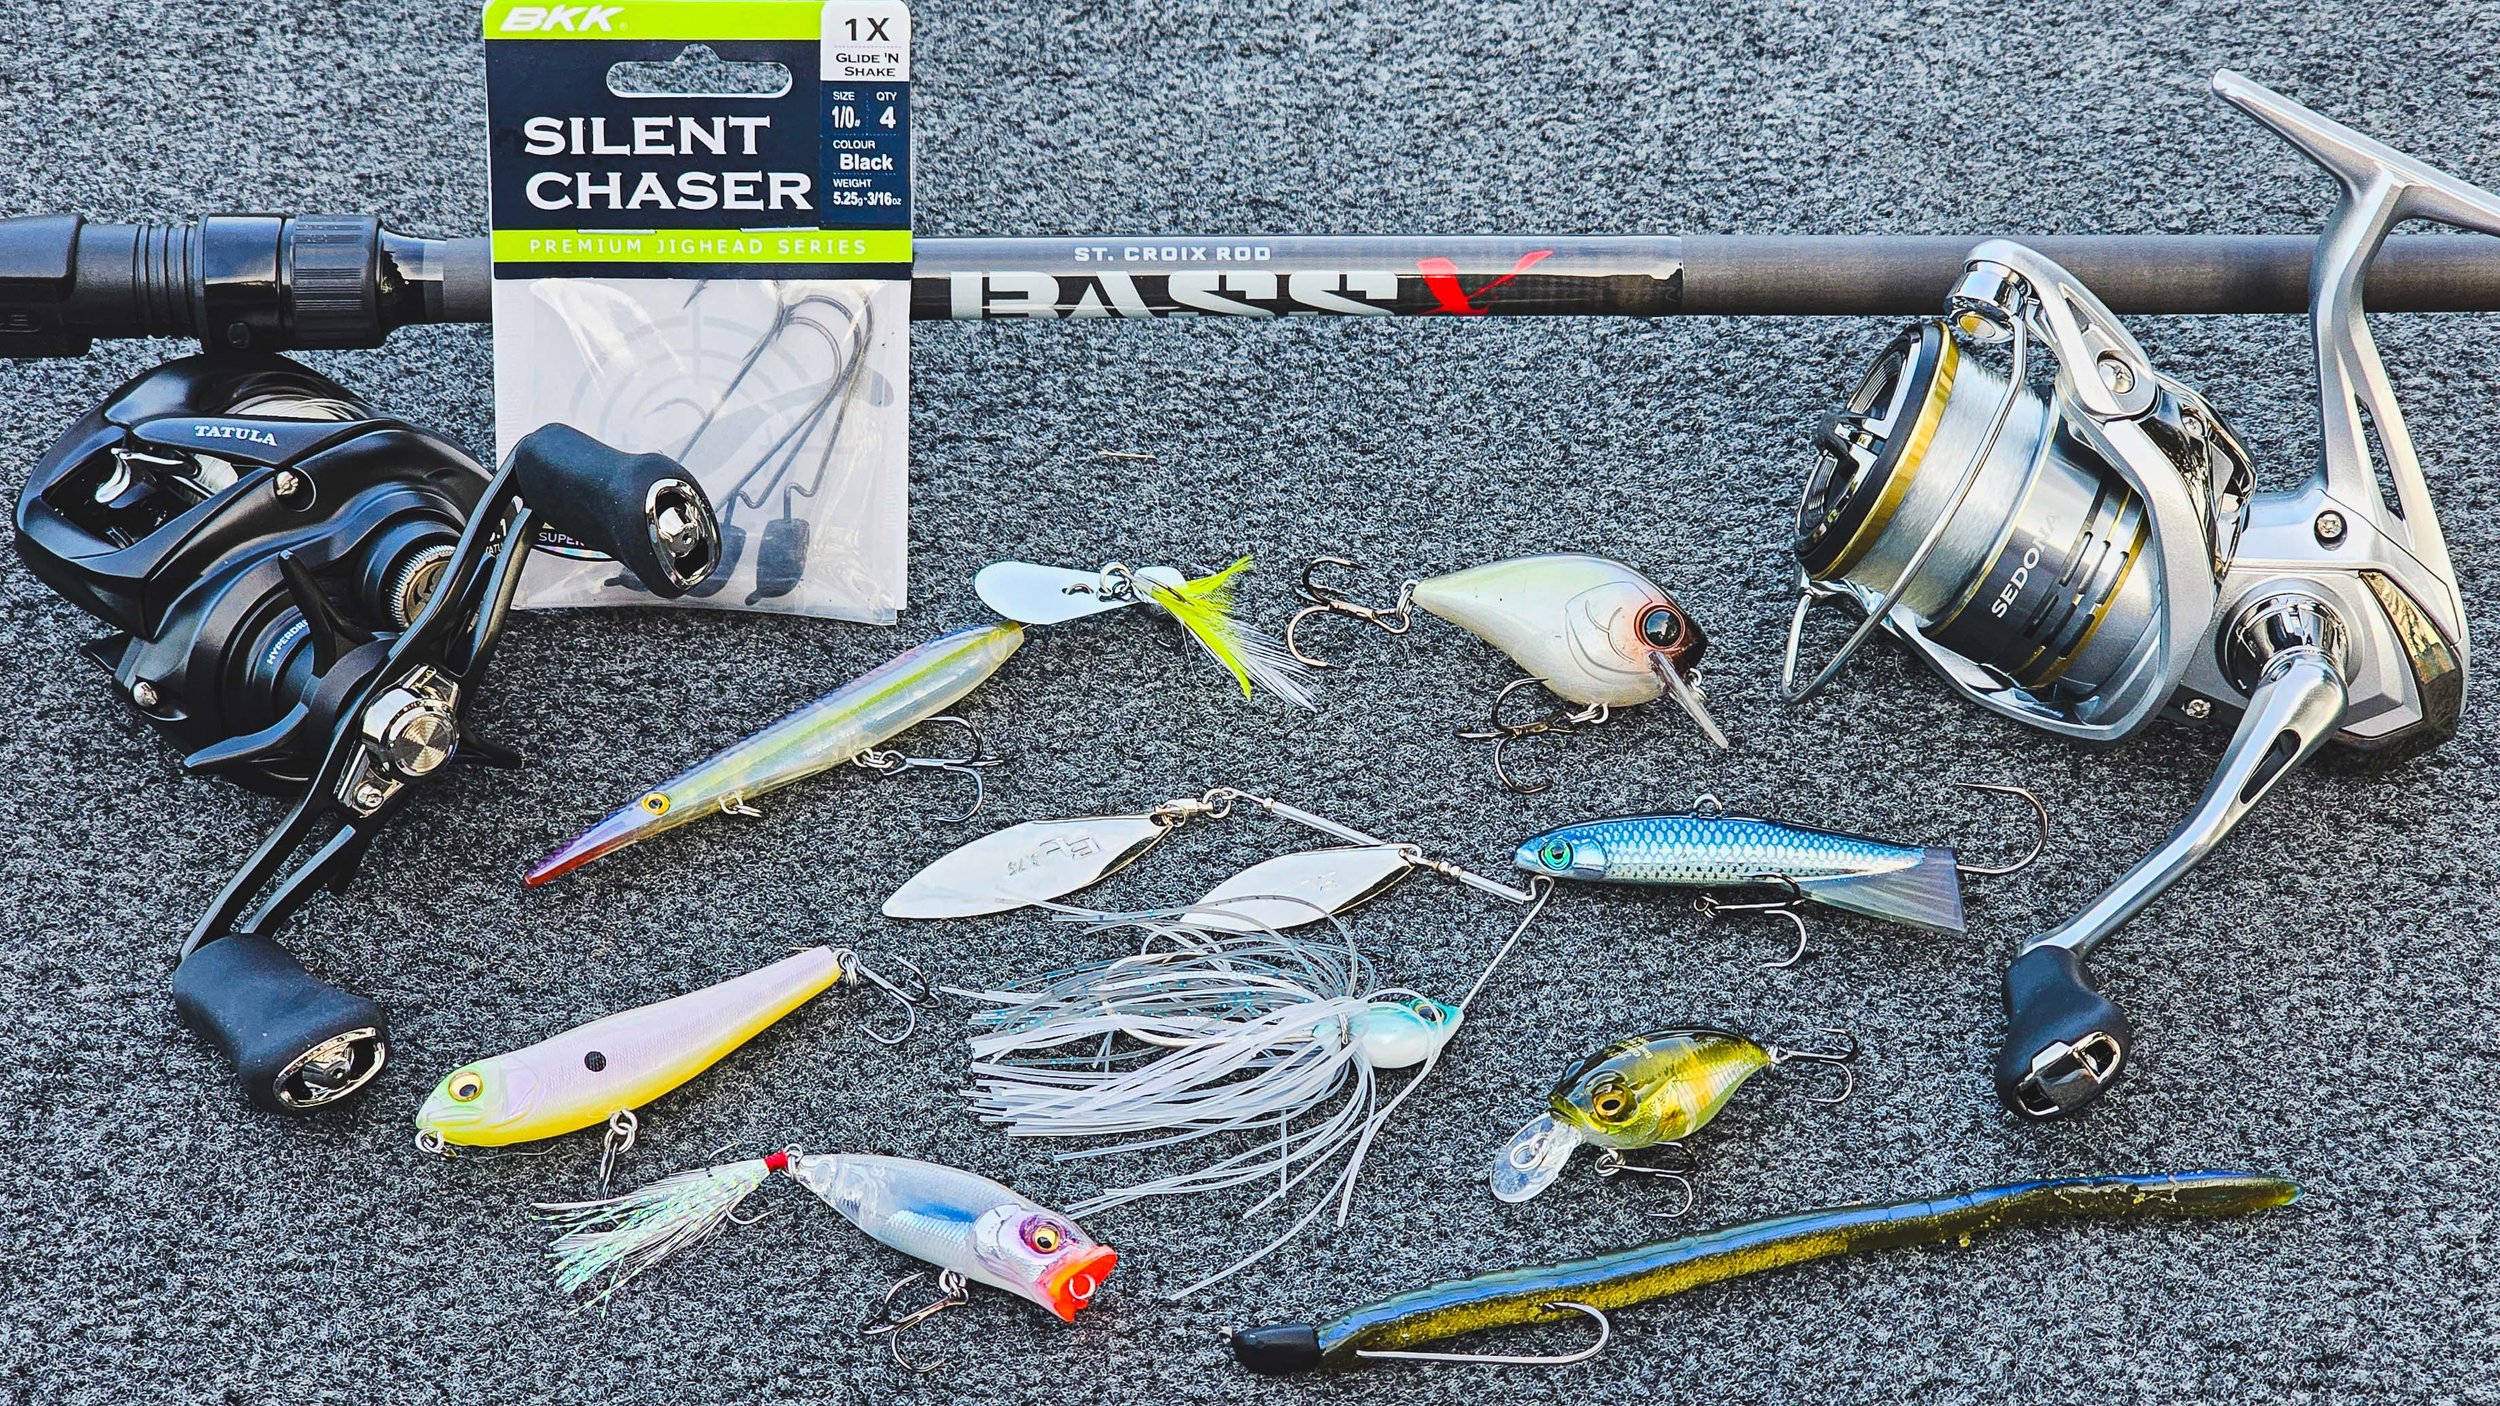 BUYER'S GUIDE: BFS (Baits, Rods, Reels, For Bait Finesse Fishing